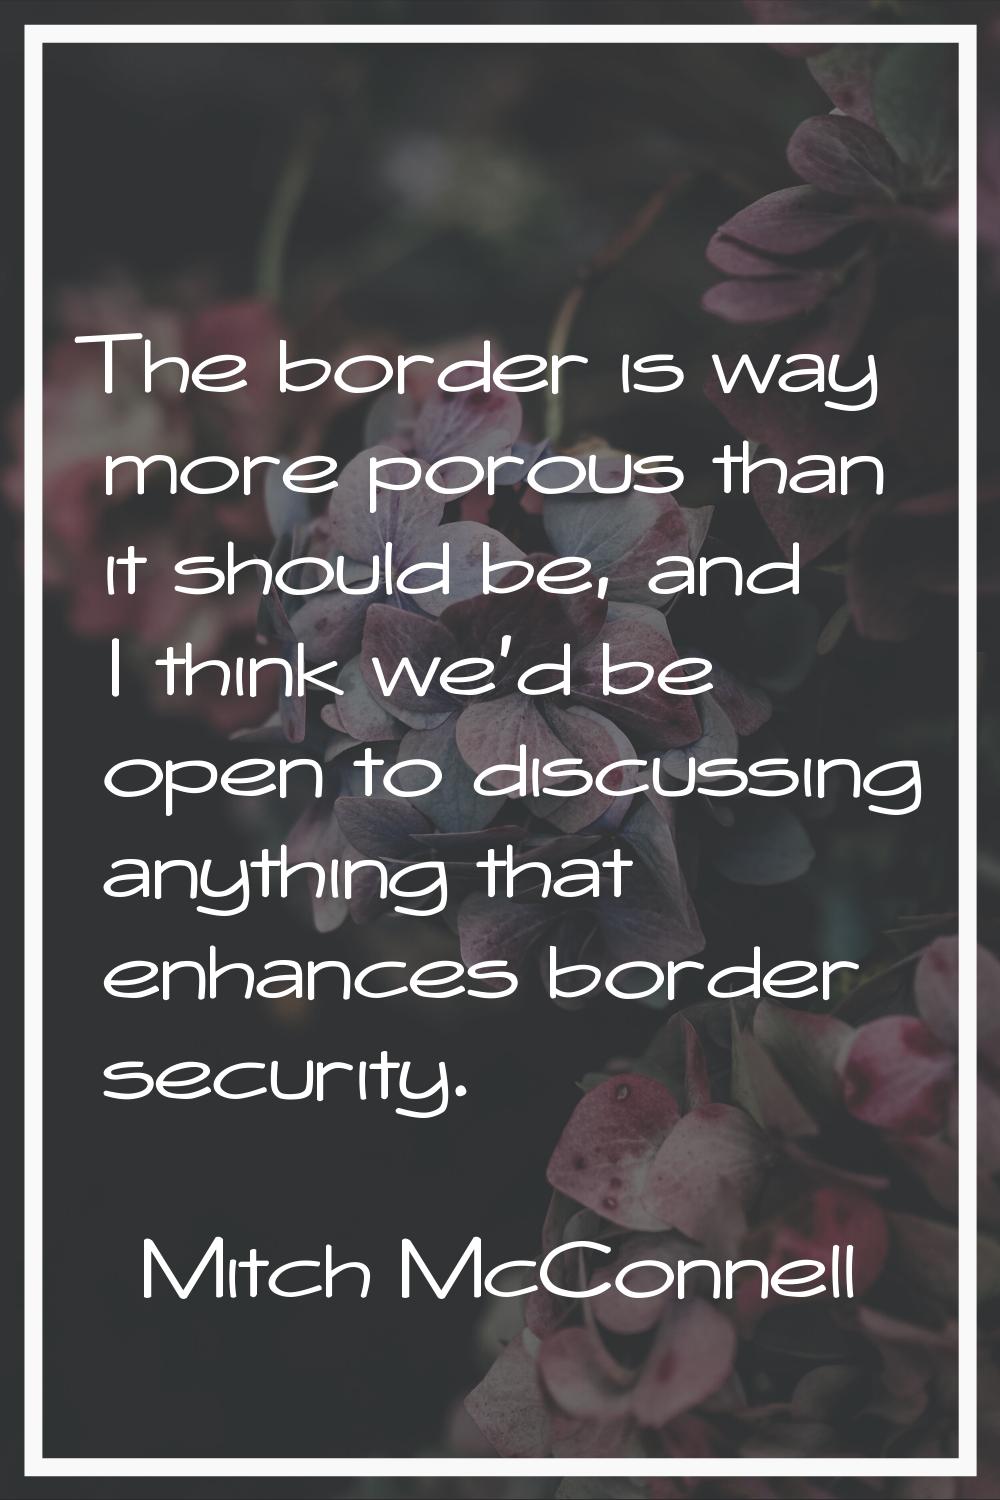 The border is way more porous than it should be, and I think we'd be open to discussing anything th